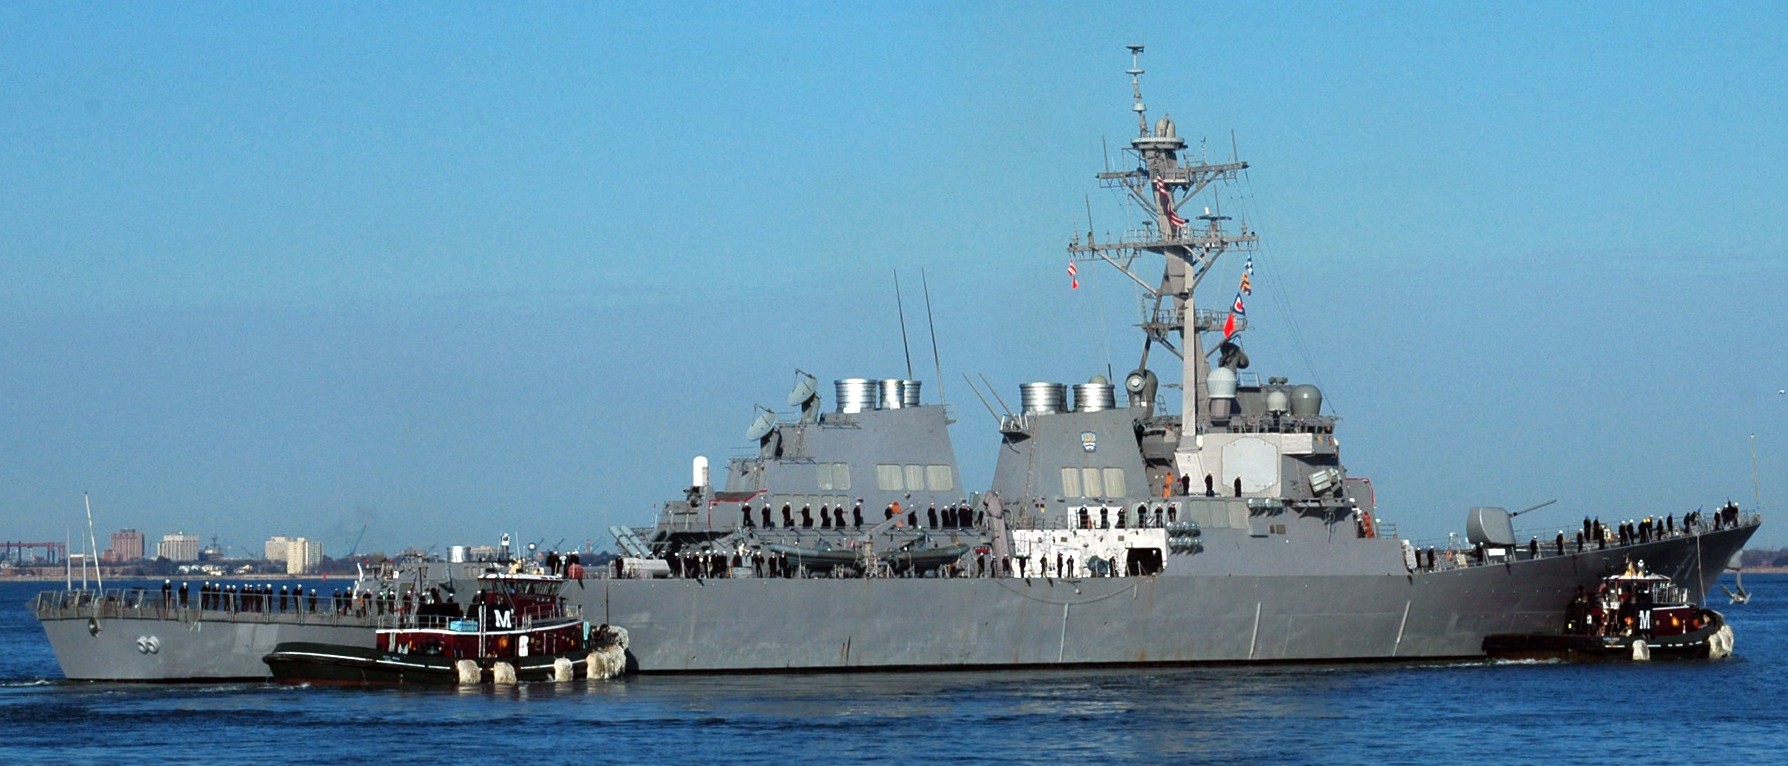 ddg-71 uss ross guided missile destroyer arleigh burke class aegis bmd 91